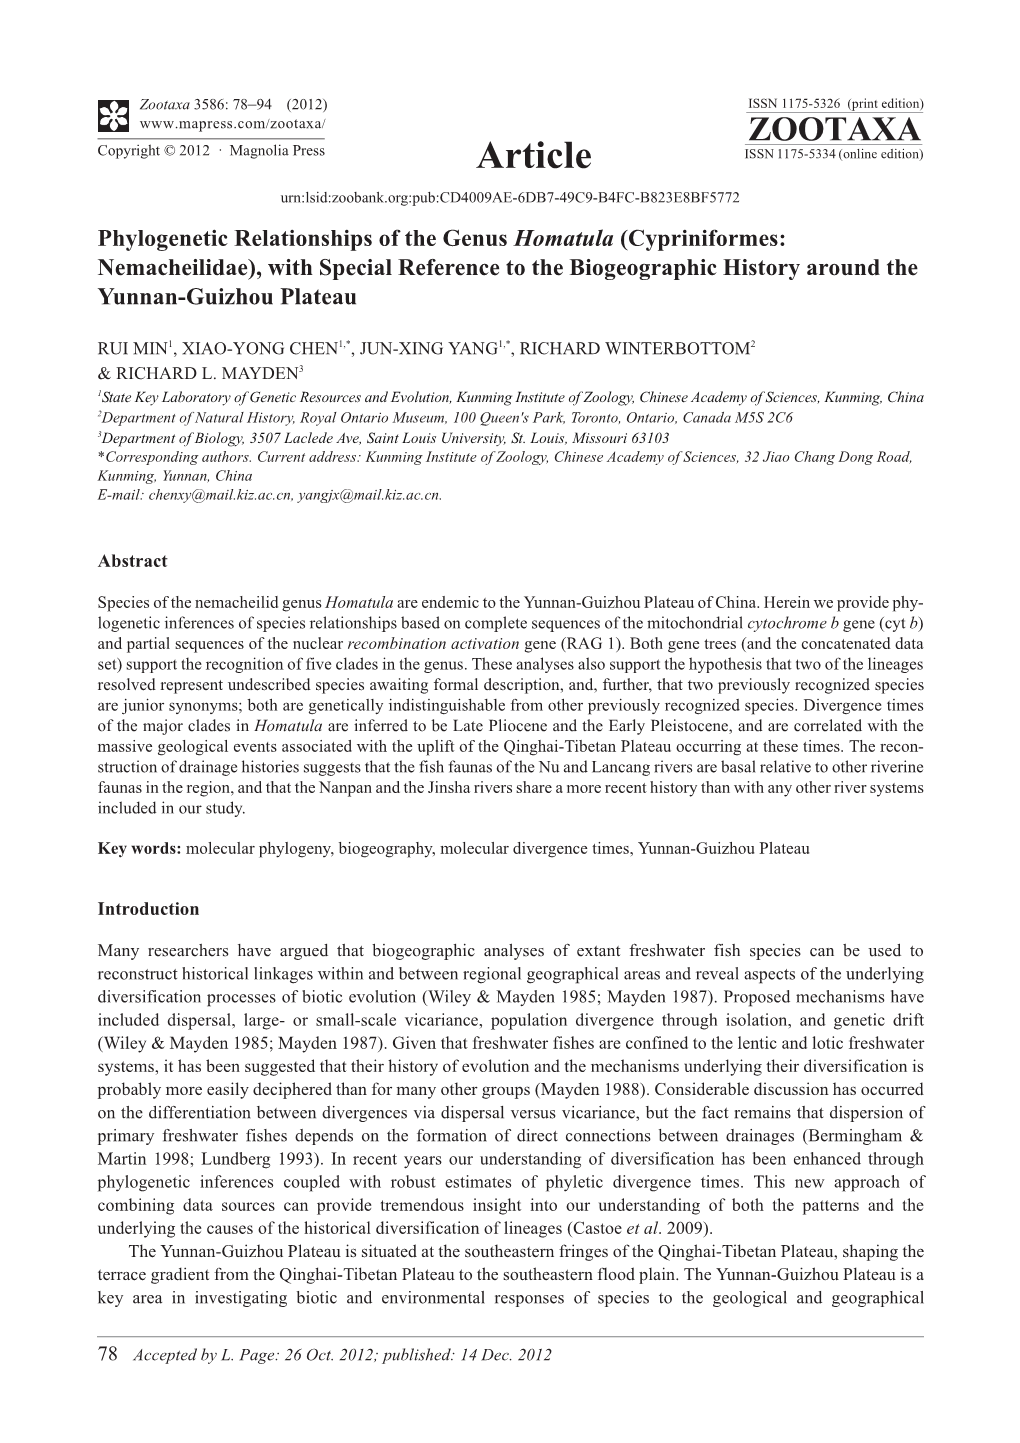 Phylogenetic Relationships of the Genus Homatula (Cypriniformes: Nemacheilidae), with Special Reference to the Biogeographic History Around the Yunnan-Guizhou Plateau